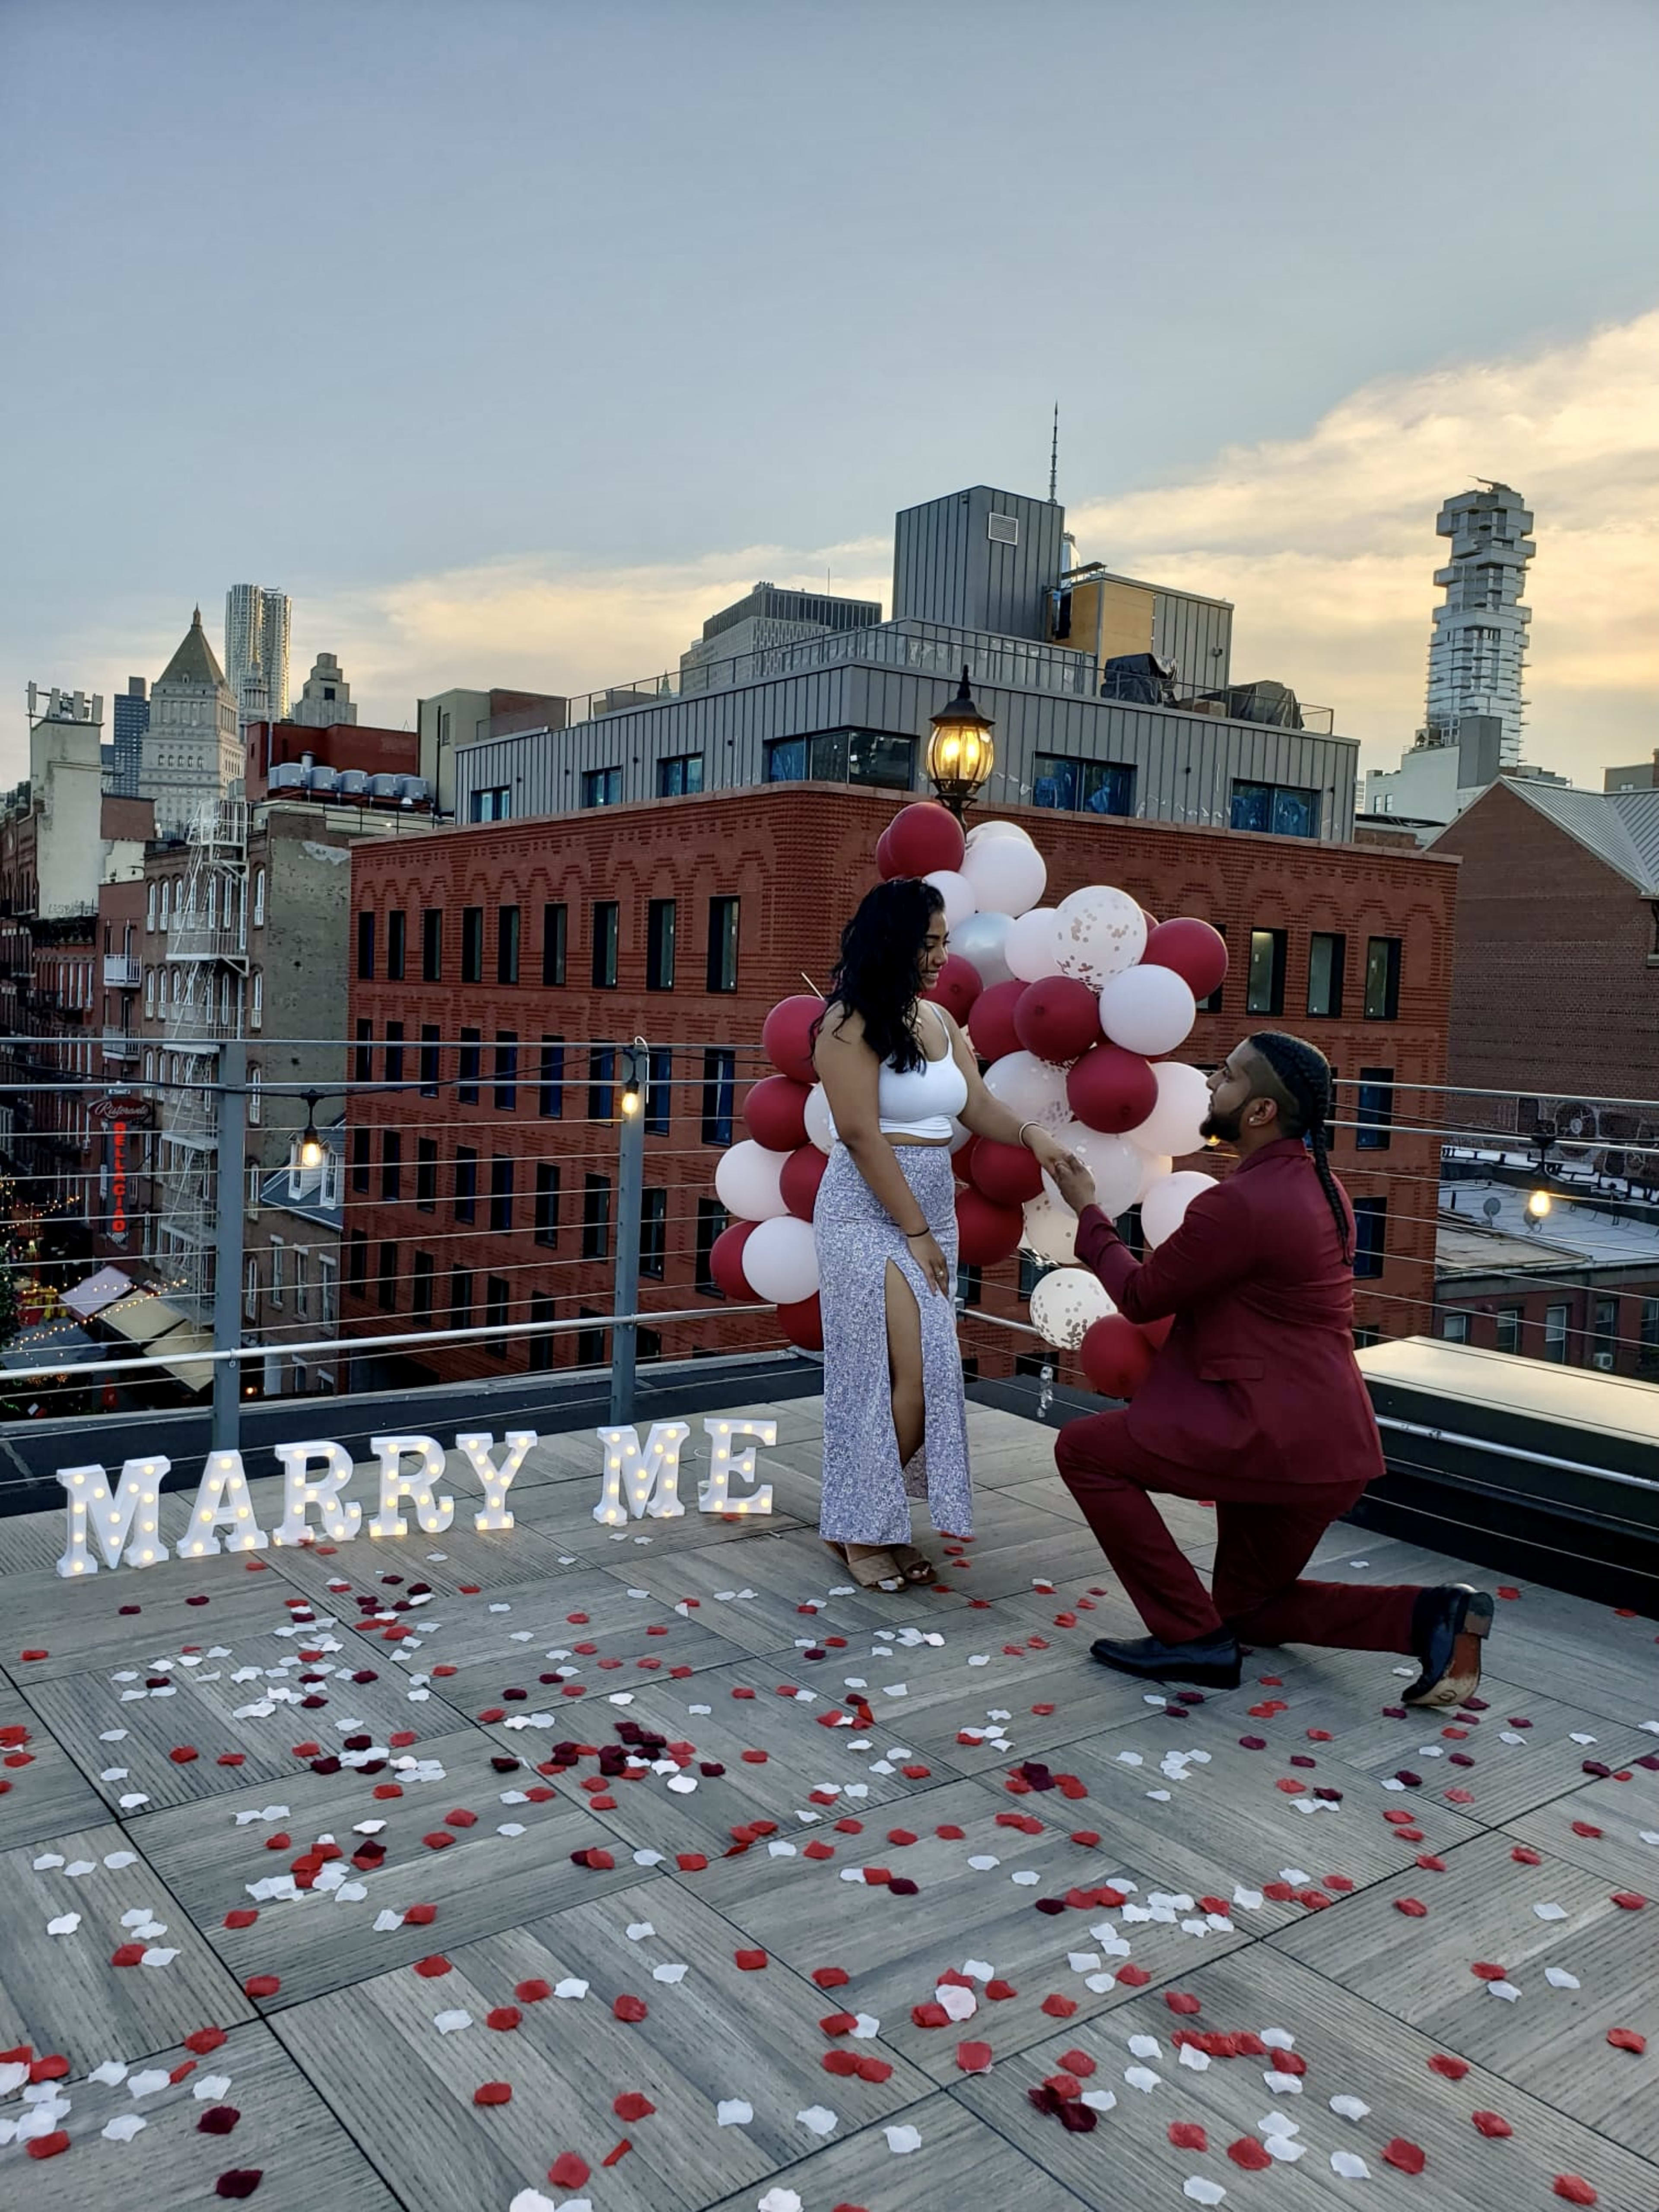 A man propose to a woman on top of a party roof.